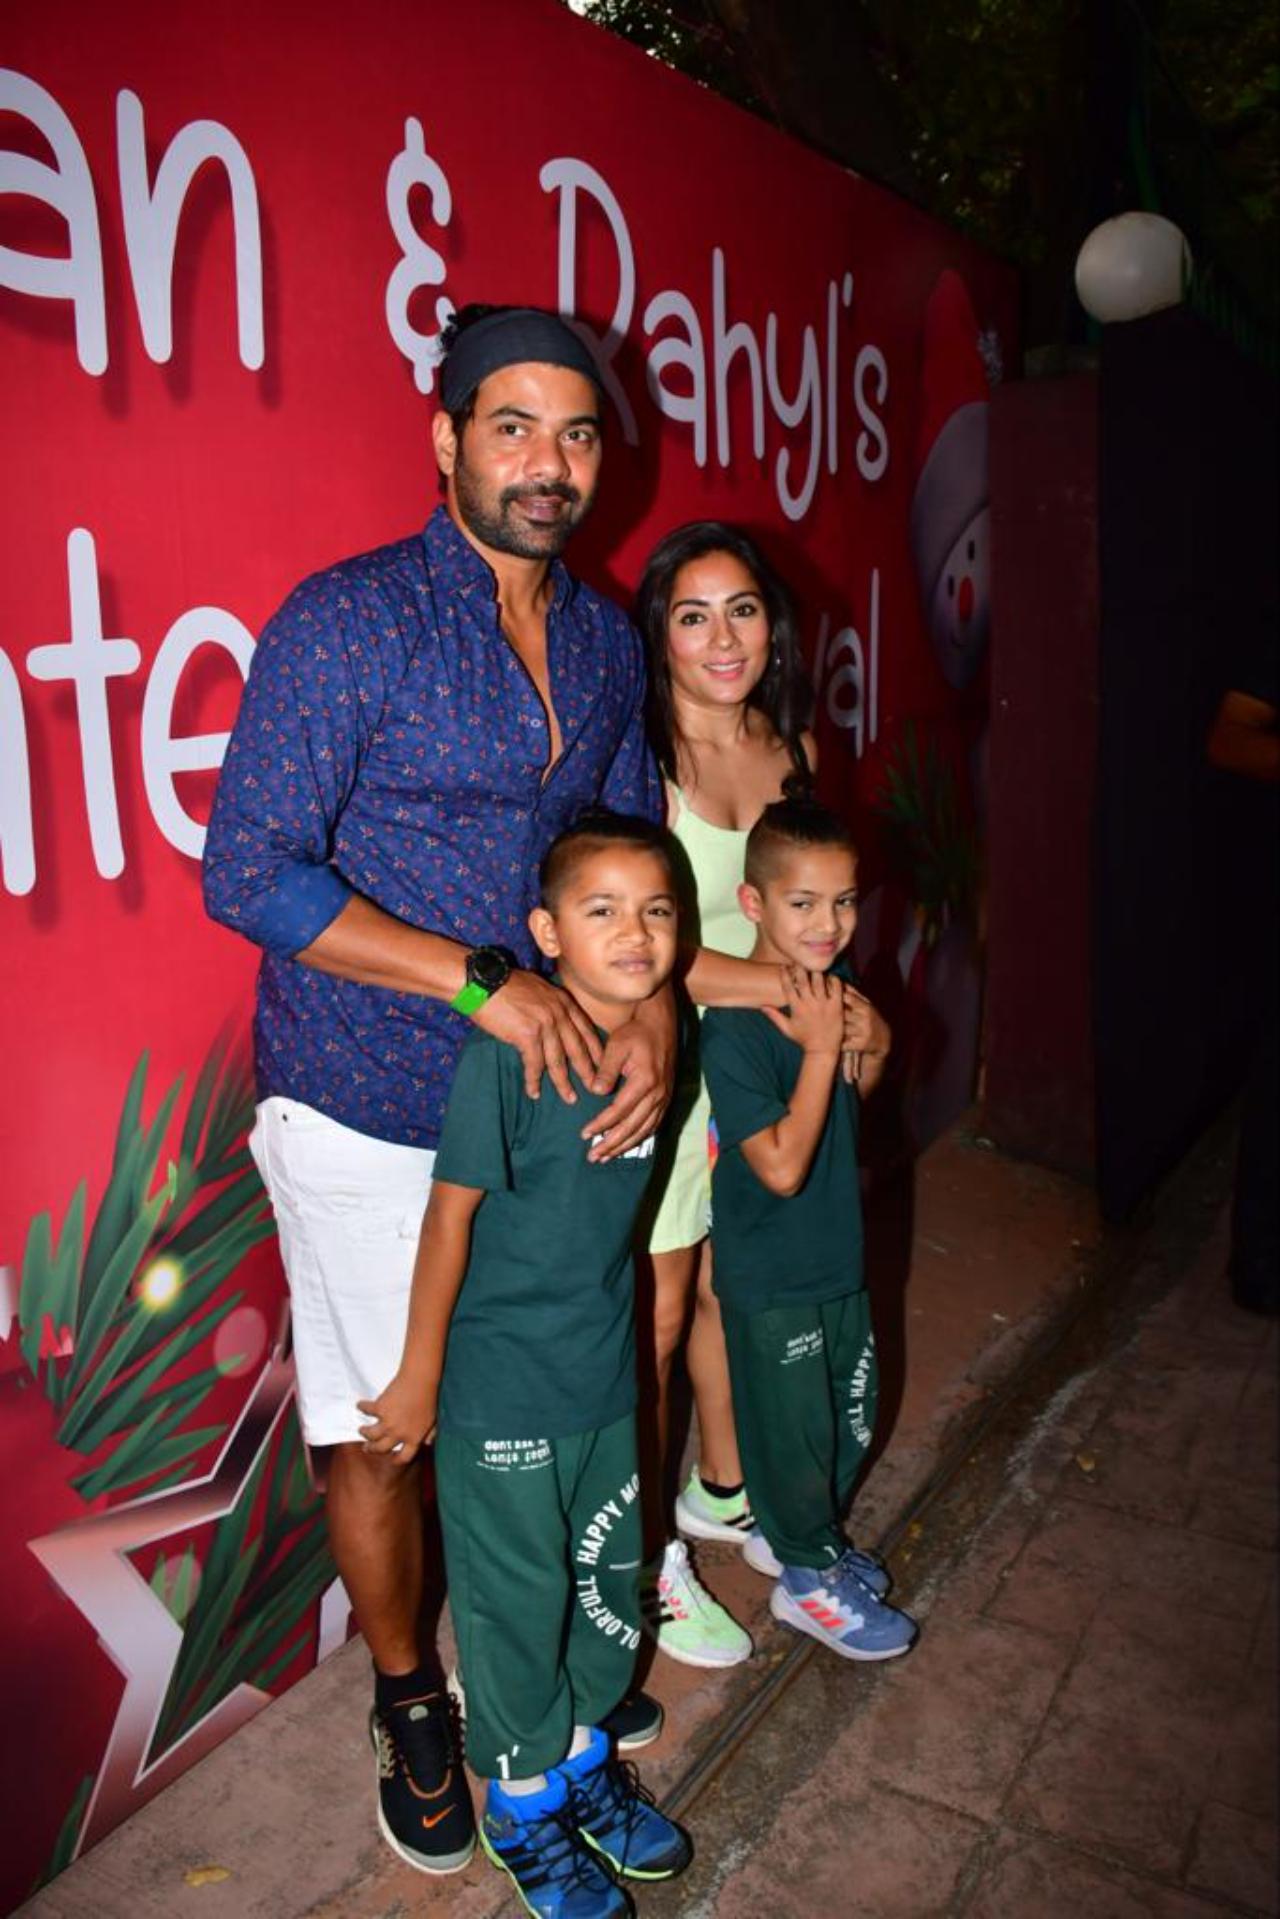 Shabbir Ahluwalia and Kanchi Kaul get their family moment as they joined with their kids- Azai and Ivarr. The kids wore co-ordinated outfits and also had the same haircut